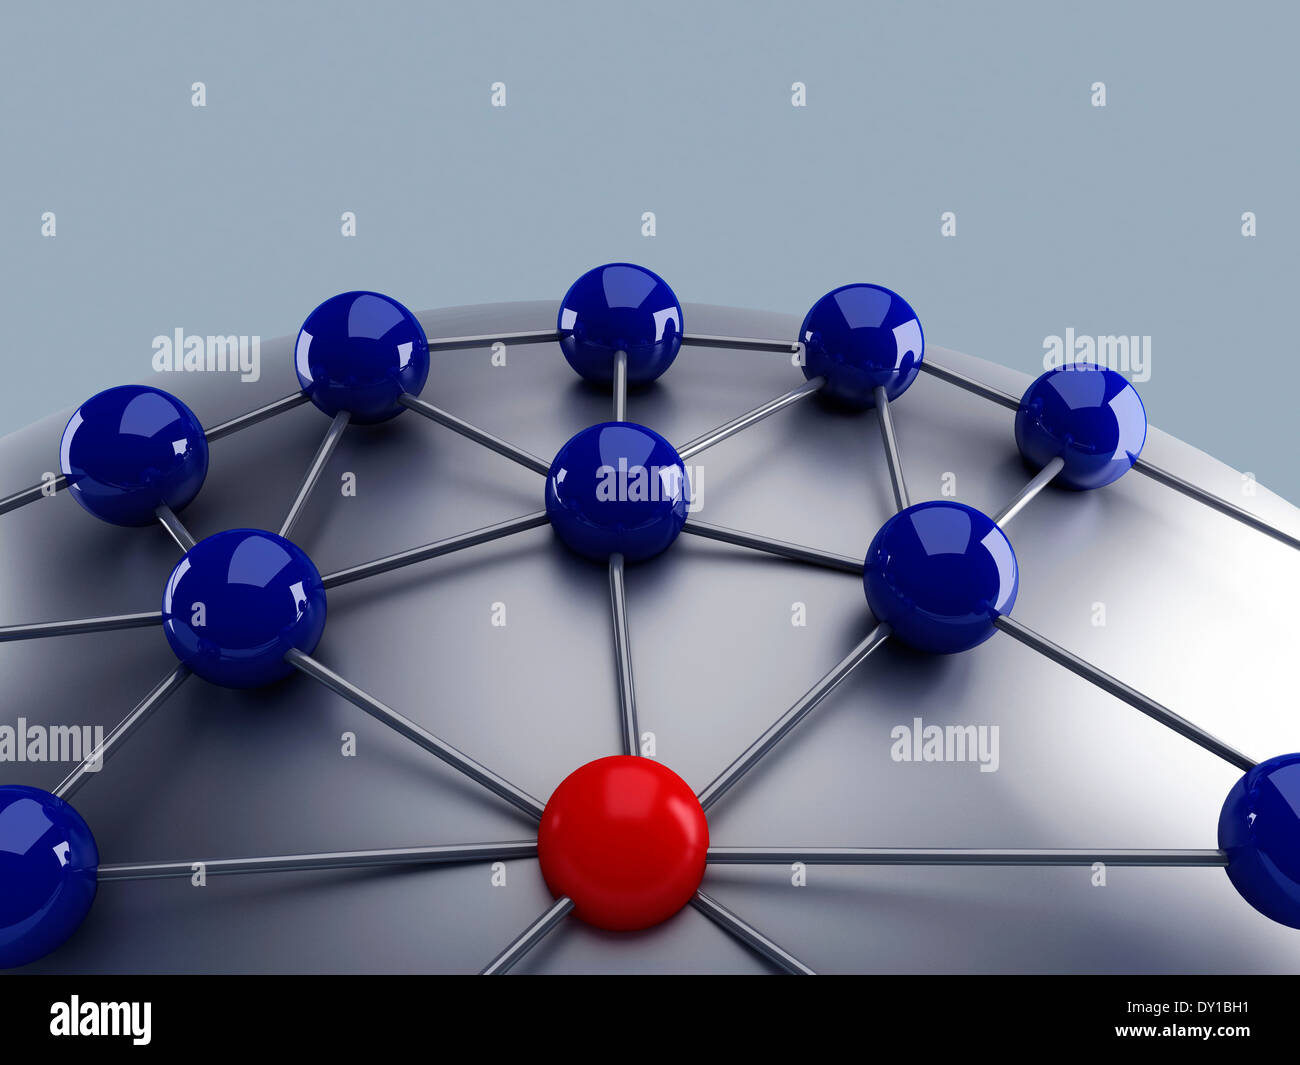 Networking concept 3d illustration Stock Photo